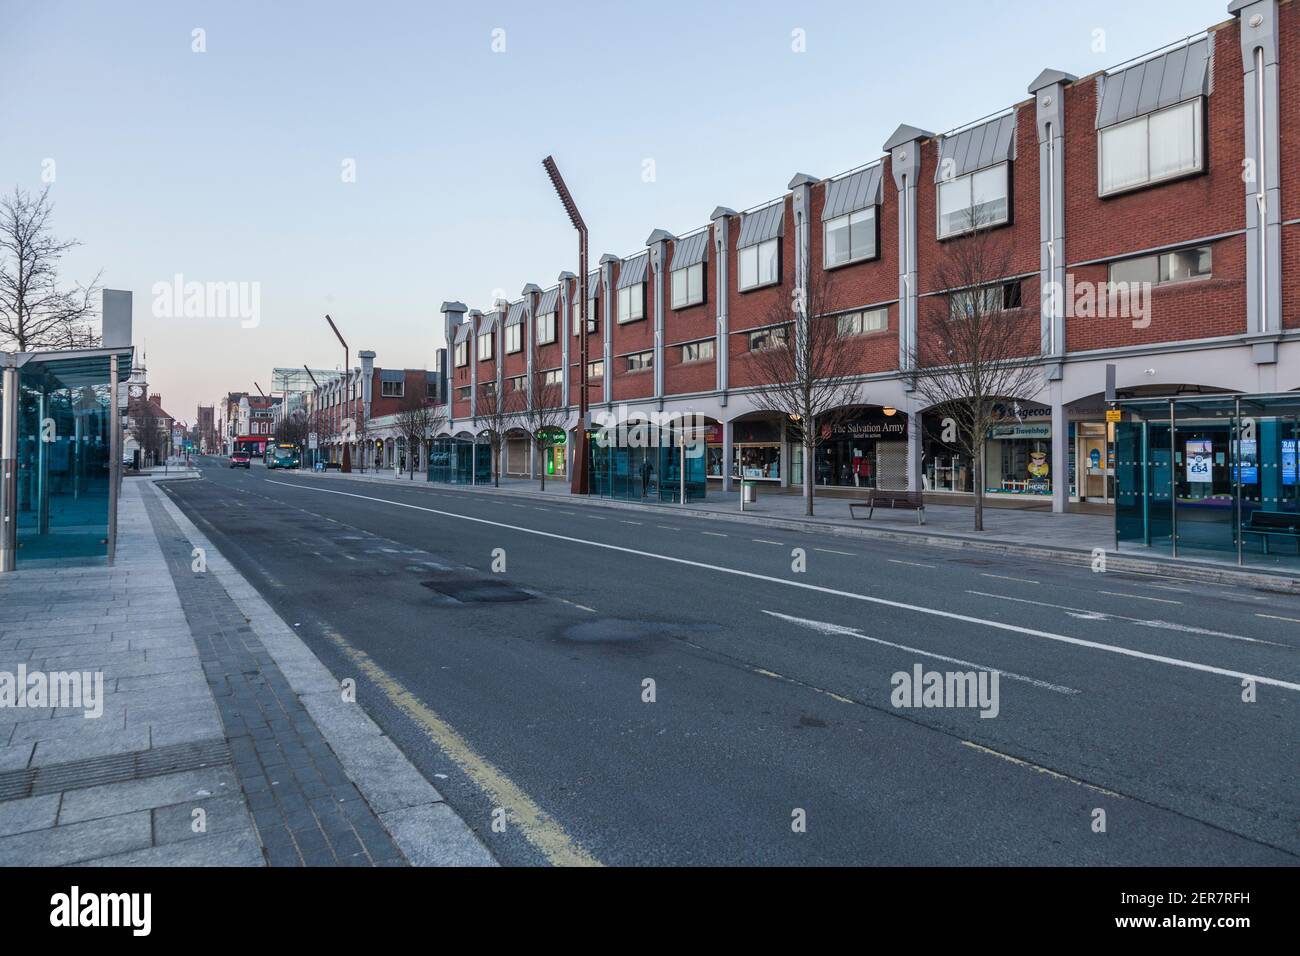 Stockton on Tees,UK. 28th February 2021. Stockton Council are planning on knocking down half their High Street , including the Castlegate Centre and replacing it with a Riverside park to open up the riverside area for leisure and recreation. David Dixon/Alamy Stock Photo